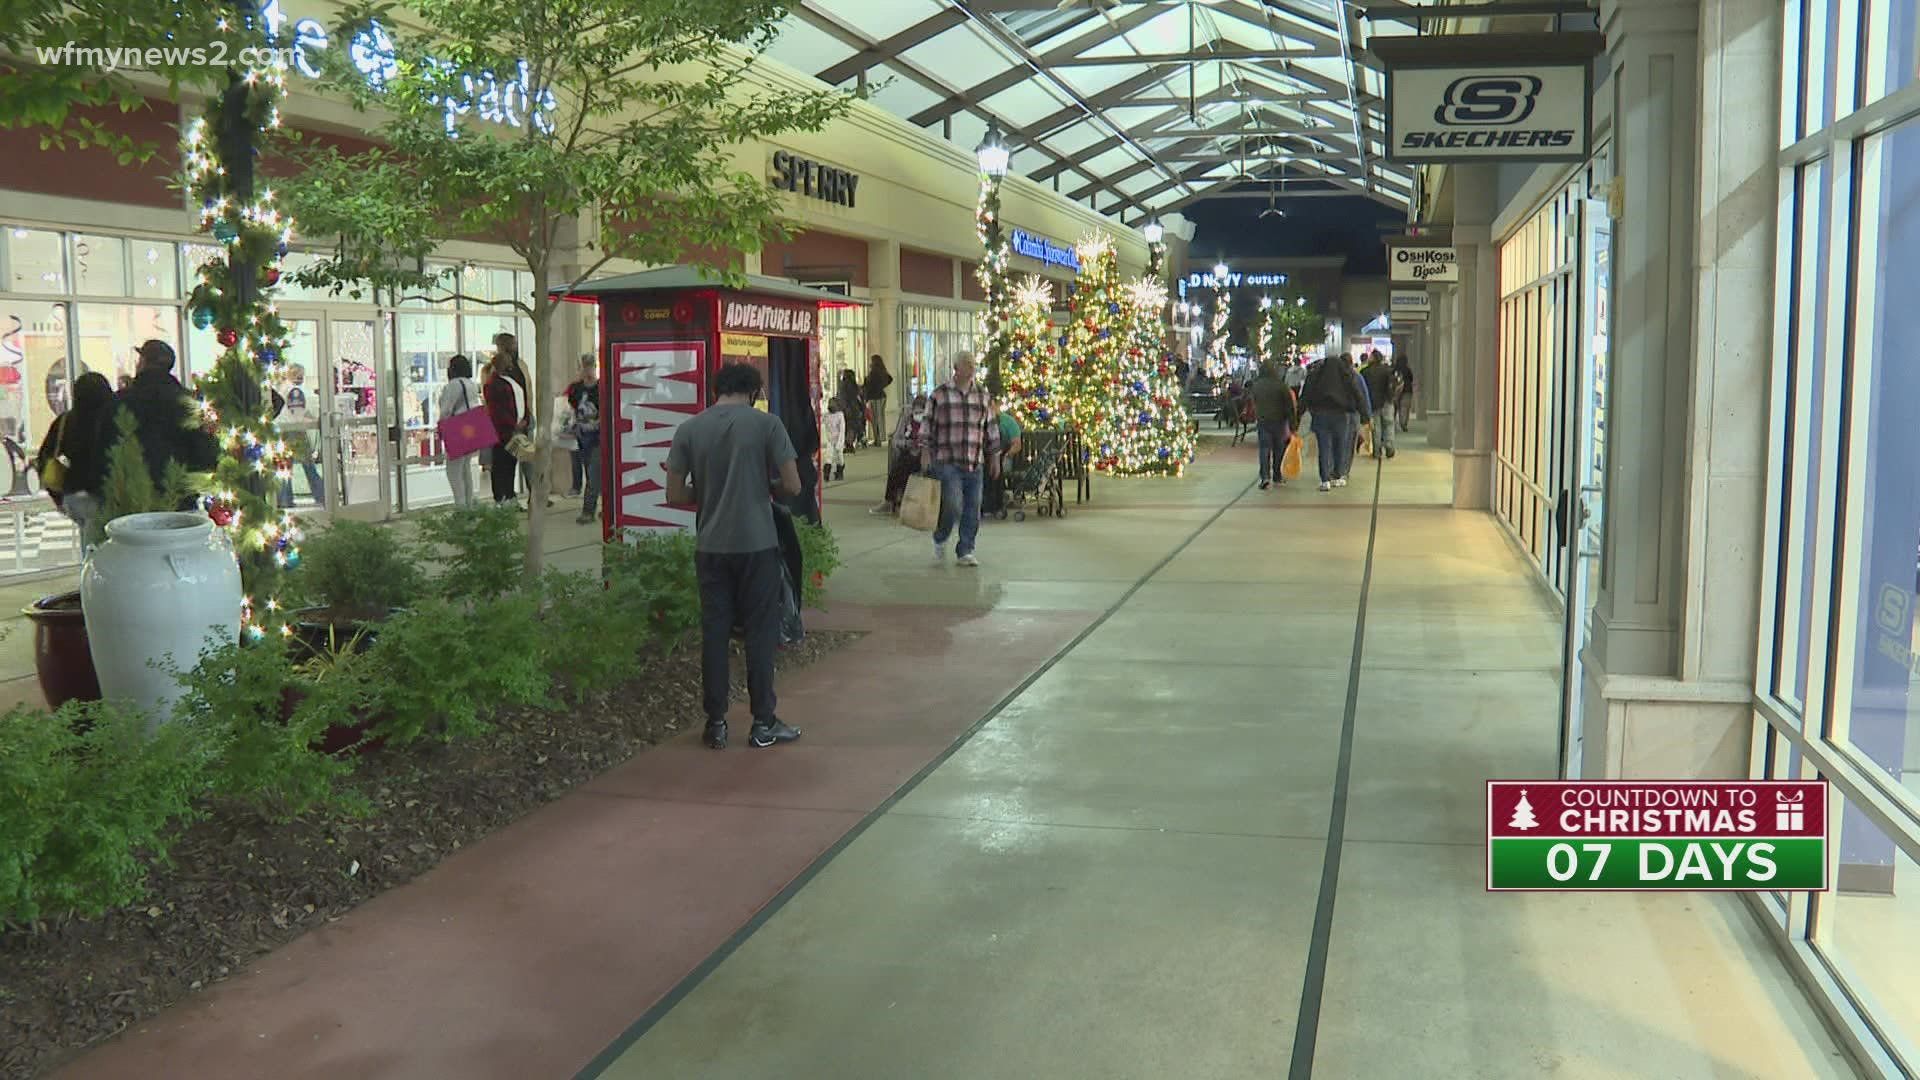 Holiday shopping is in full swing on what is called one of the busiest shopping says of the year.